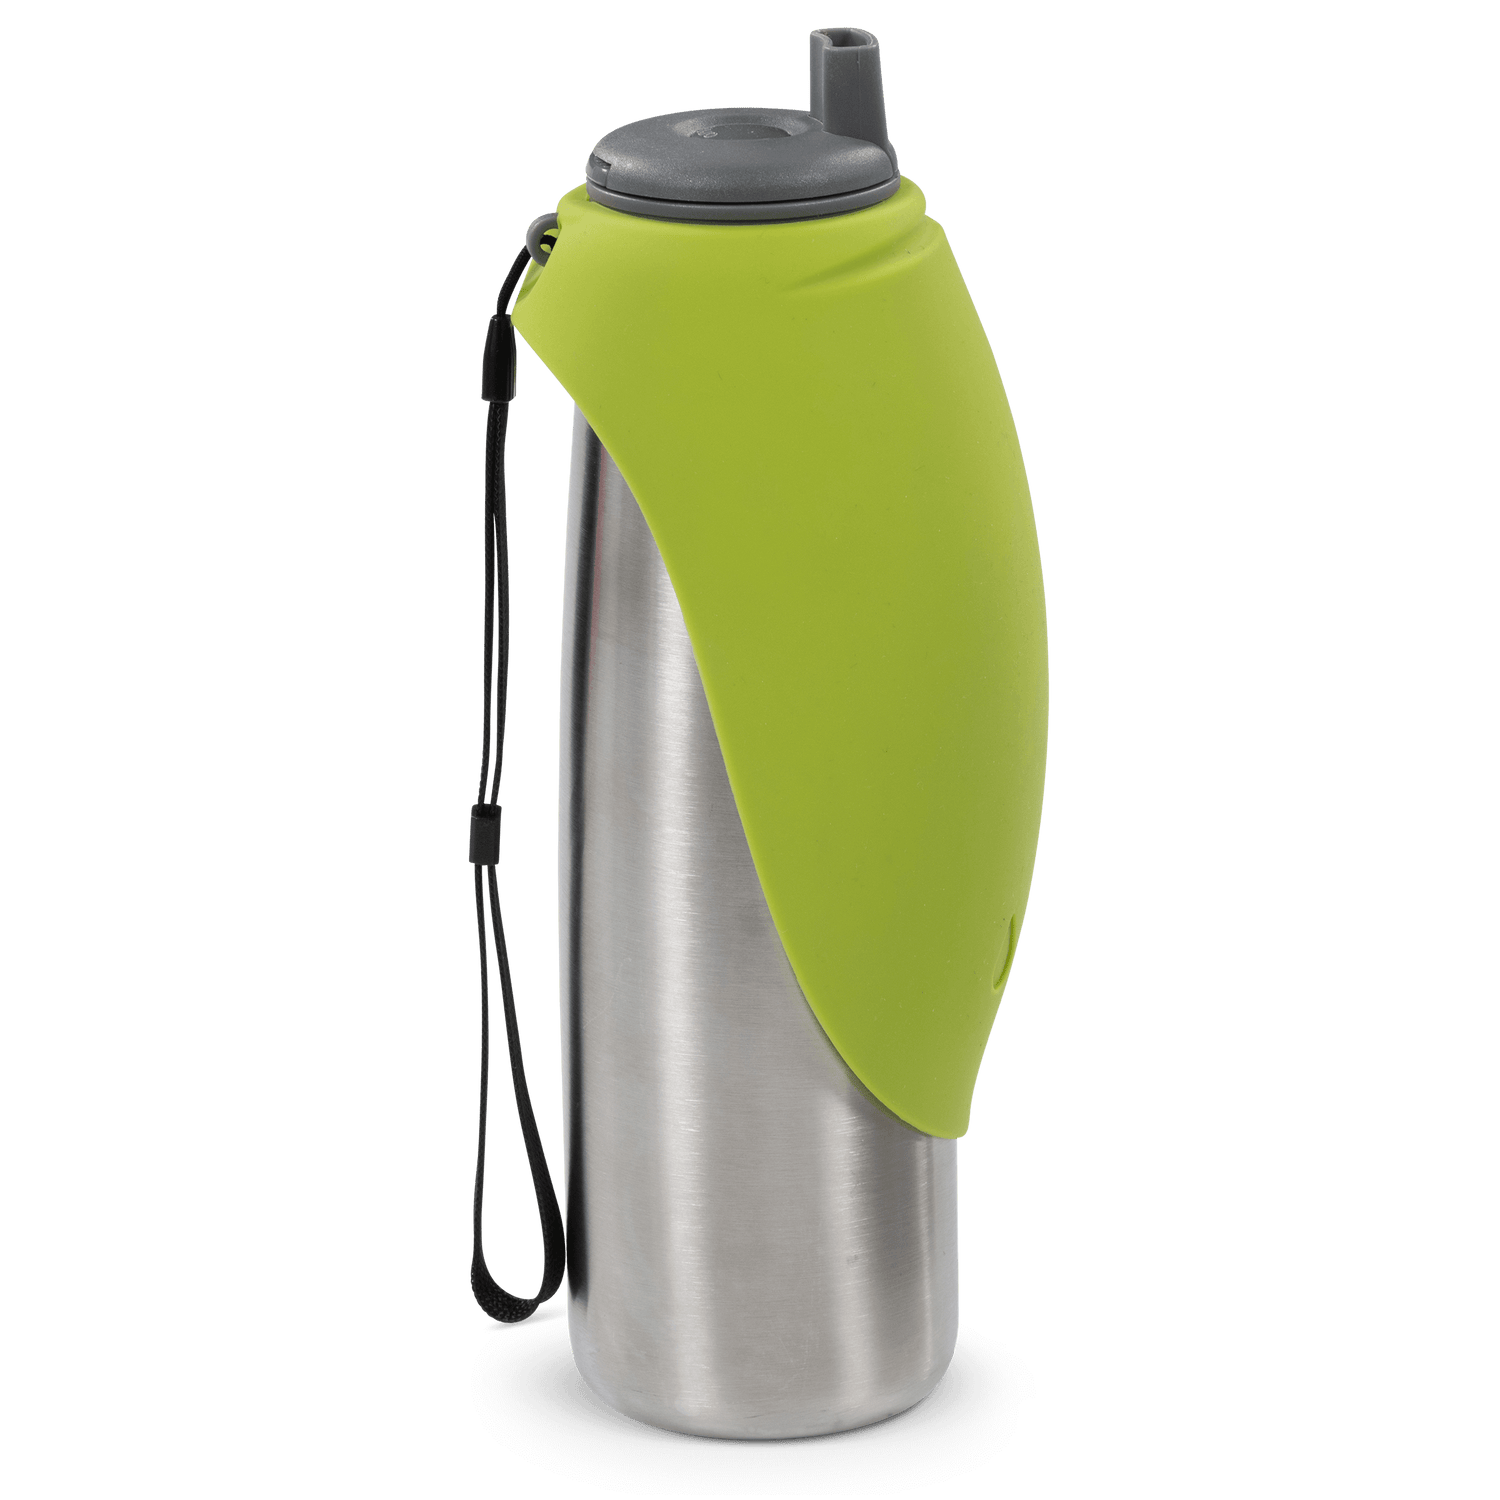 Green and stainless steel stay cool insulated travel dog water bottle.  Fits standard car cup holders.  600 ml capacity. 